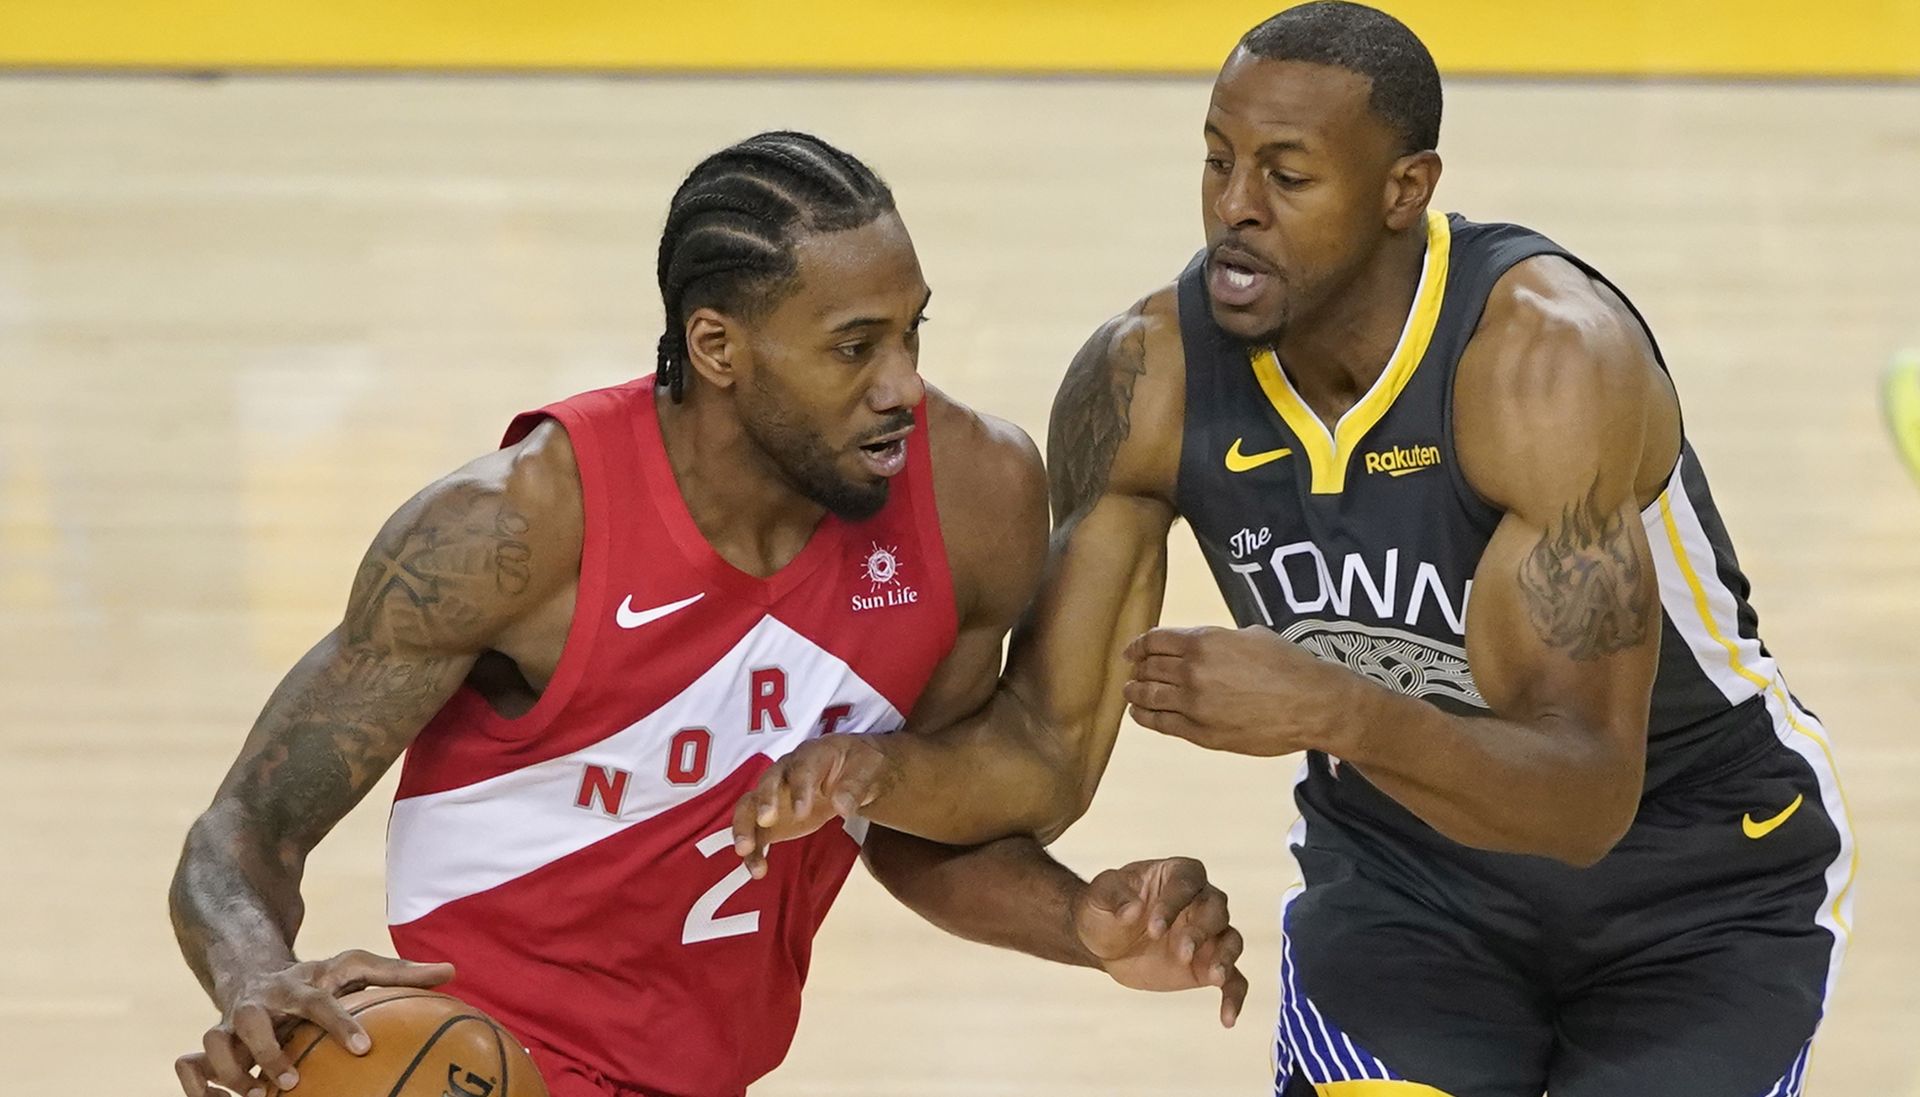 epa07646928 Toronto Raptors player Kawhi Leonard (L) drives against Golden State Warriors player Andre Iguodala (R) during the first half of the NBA Finals game six at Oracle Arena, in Oakland, California, USA, 13 June 2019.  EPA/JOHN G MABANGLO SHUTTERSTOCK OUT SHUTTERSTOCK OUT